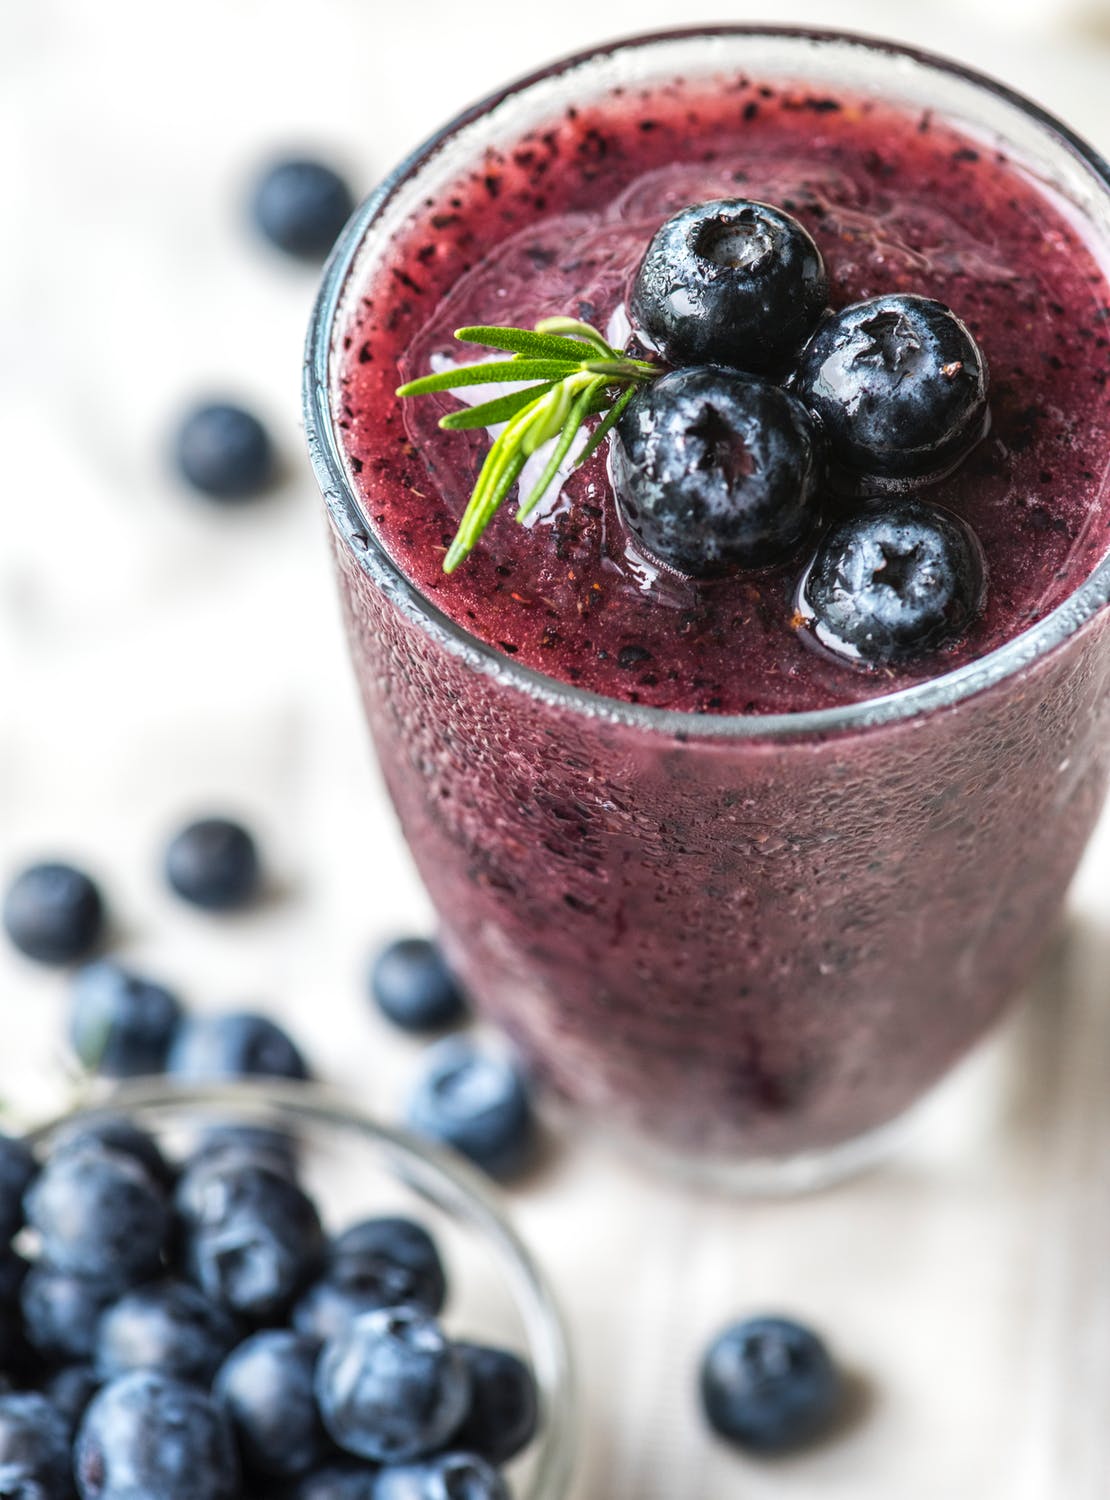 Blueberries have powerful antioxidants to repair dry, damaged, aged skin, and bring it back to life! 